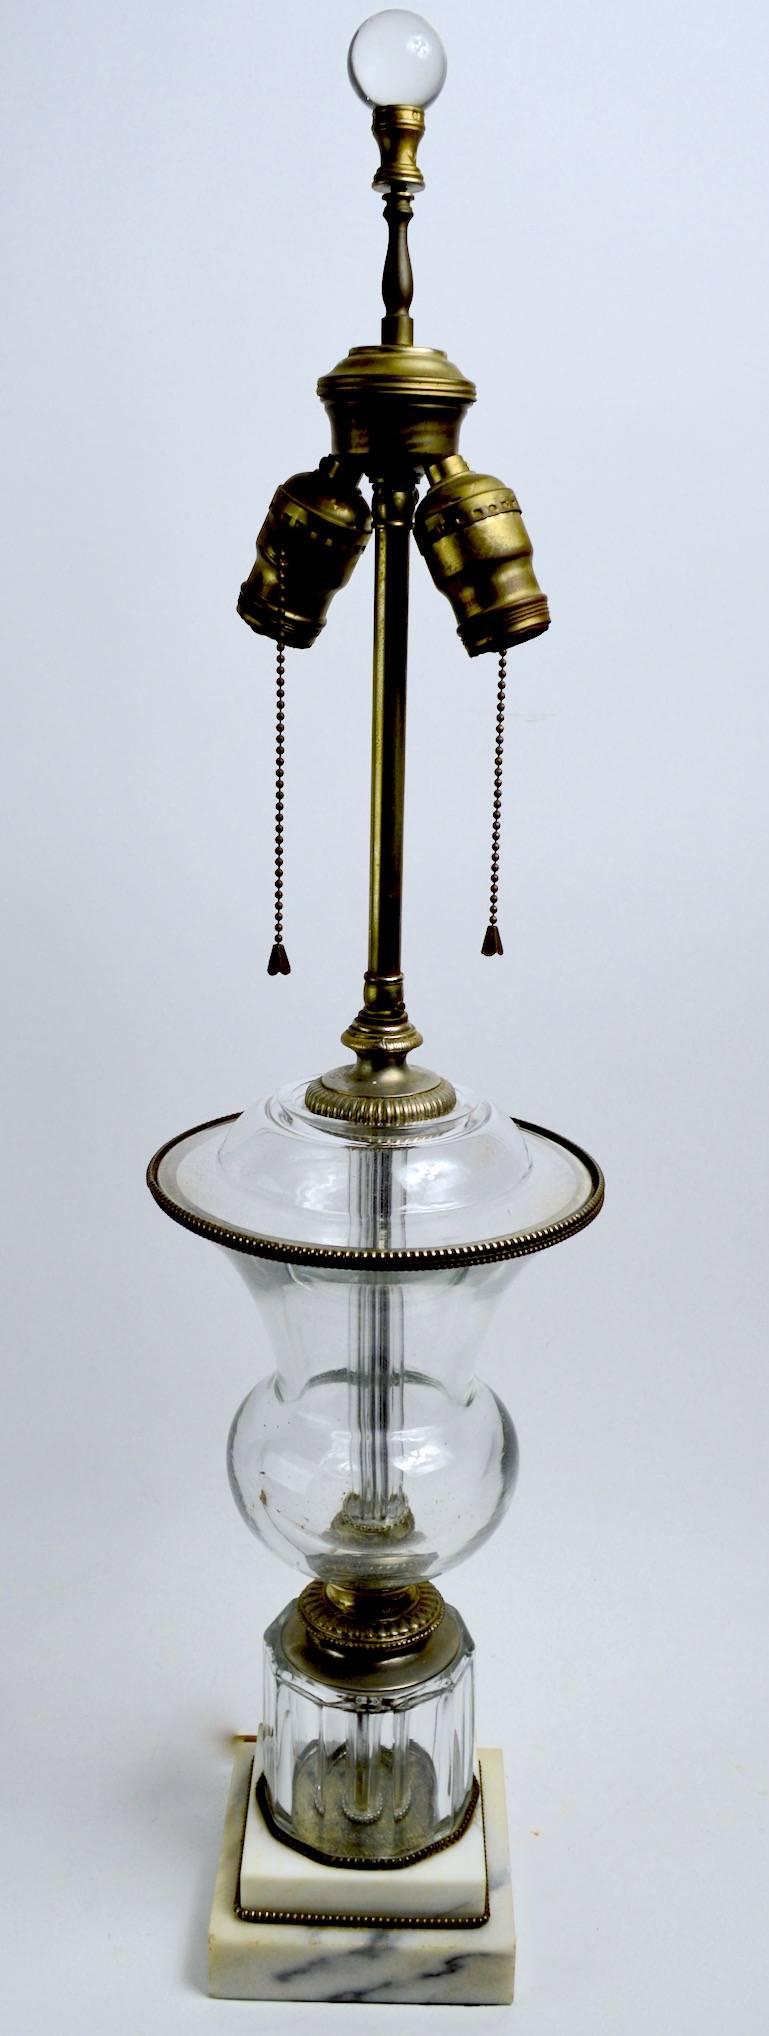 Classical form glass lamp with cast metal trim, on stepped marble base. Unknown maker, in the style of Baccarat. Height tom top of lamp body 15 inch x 7 inch diameter. Clean working condition, minor dust inside lamp body, shade not included.